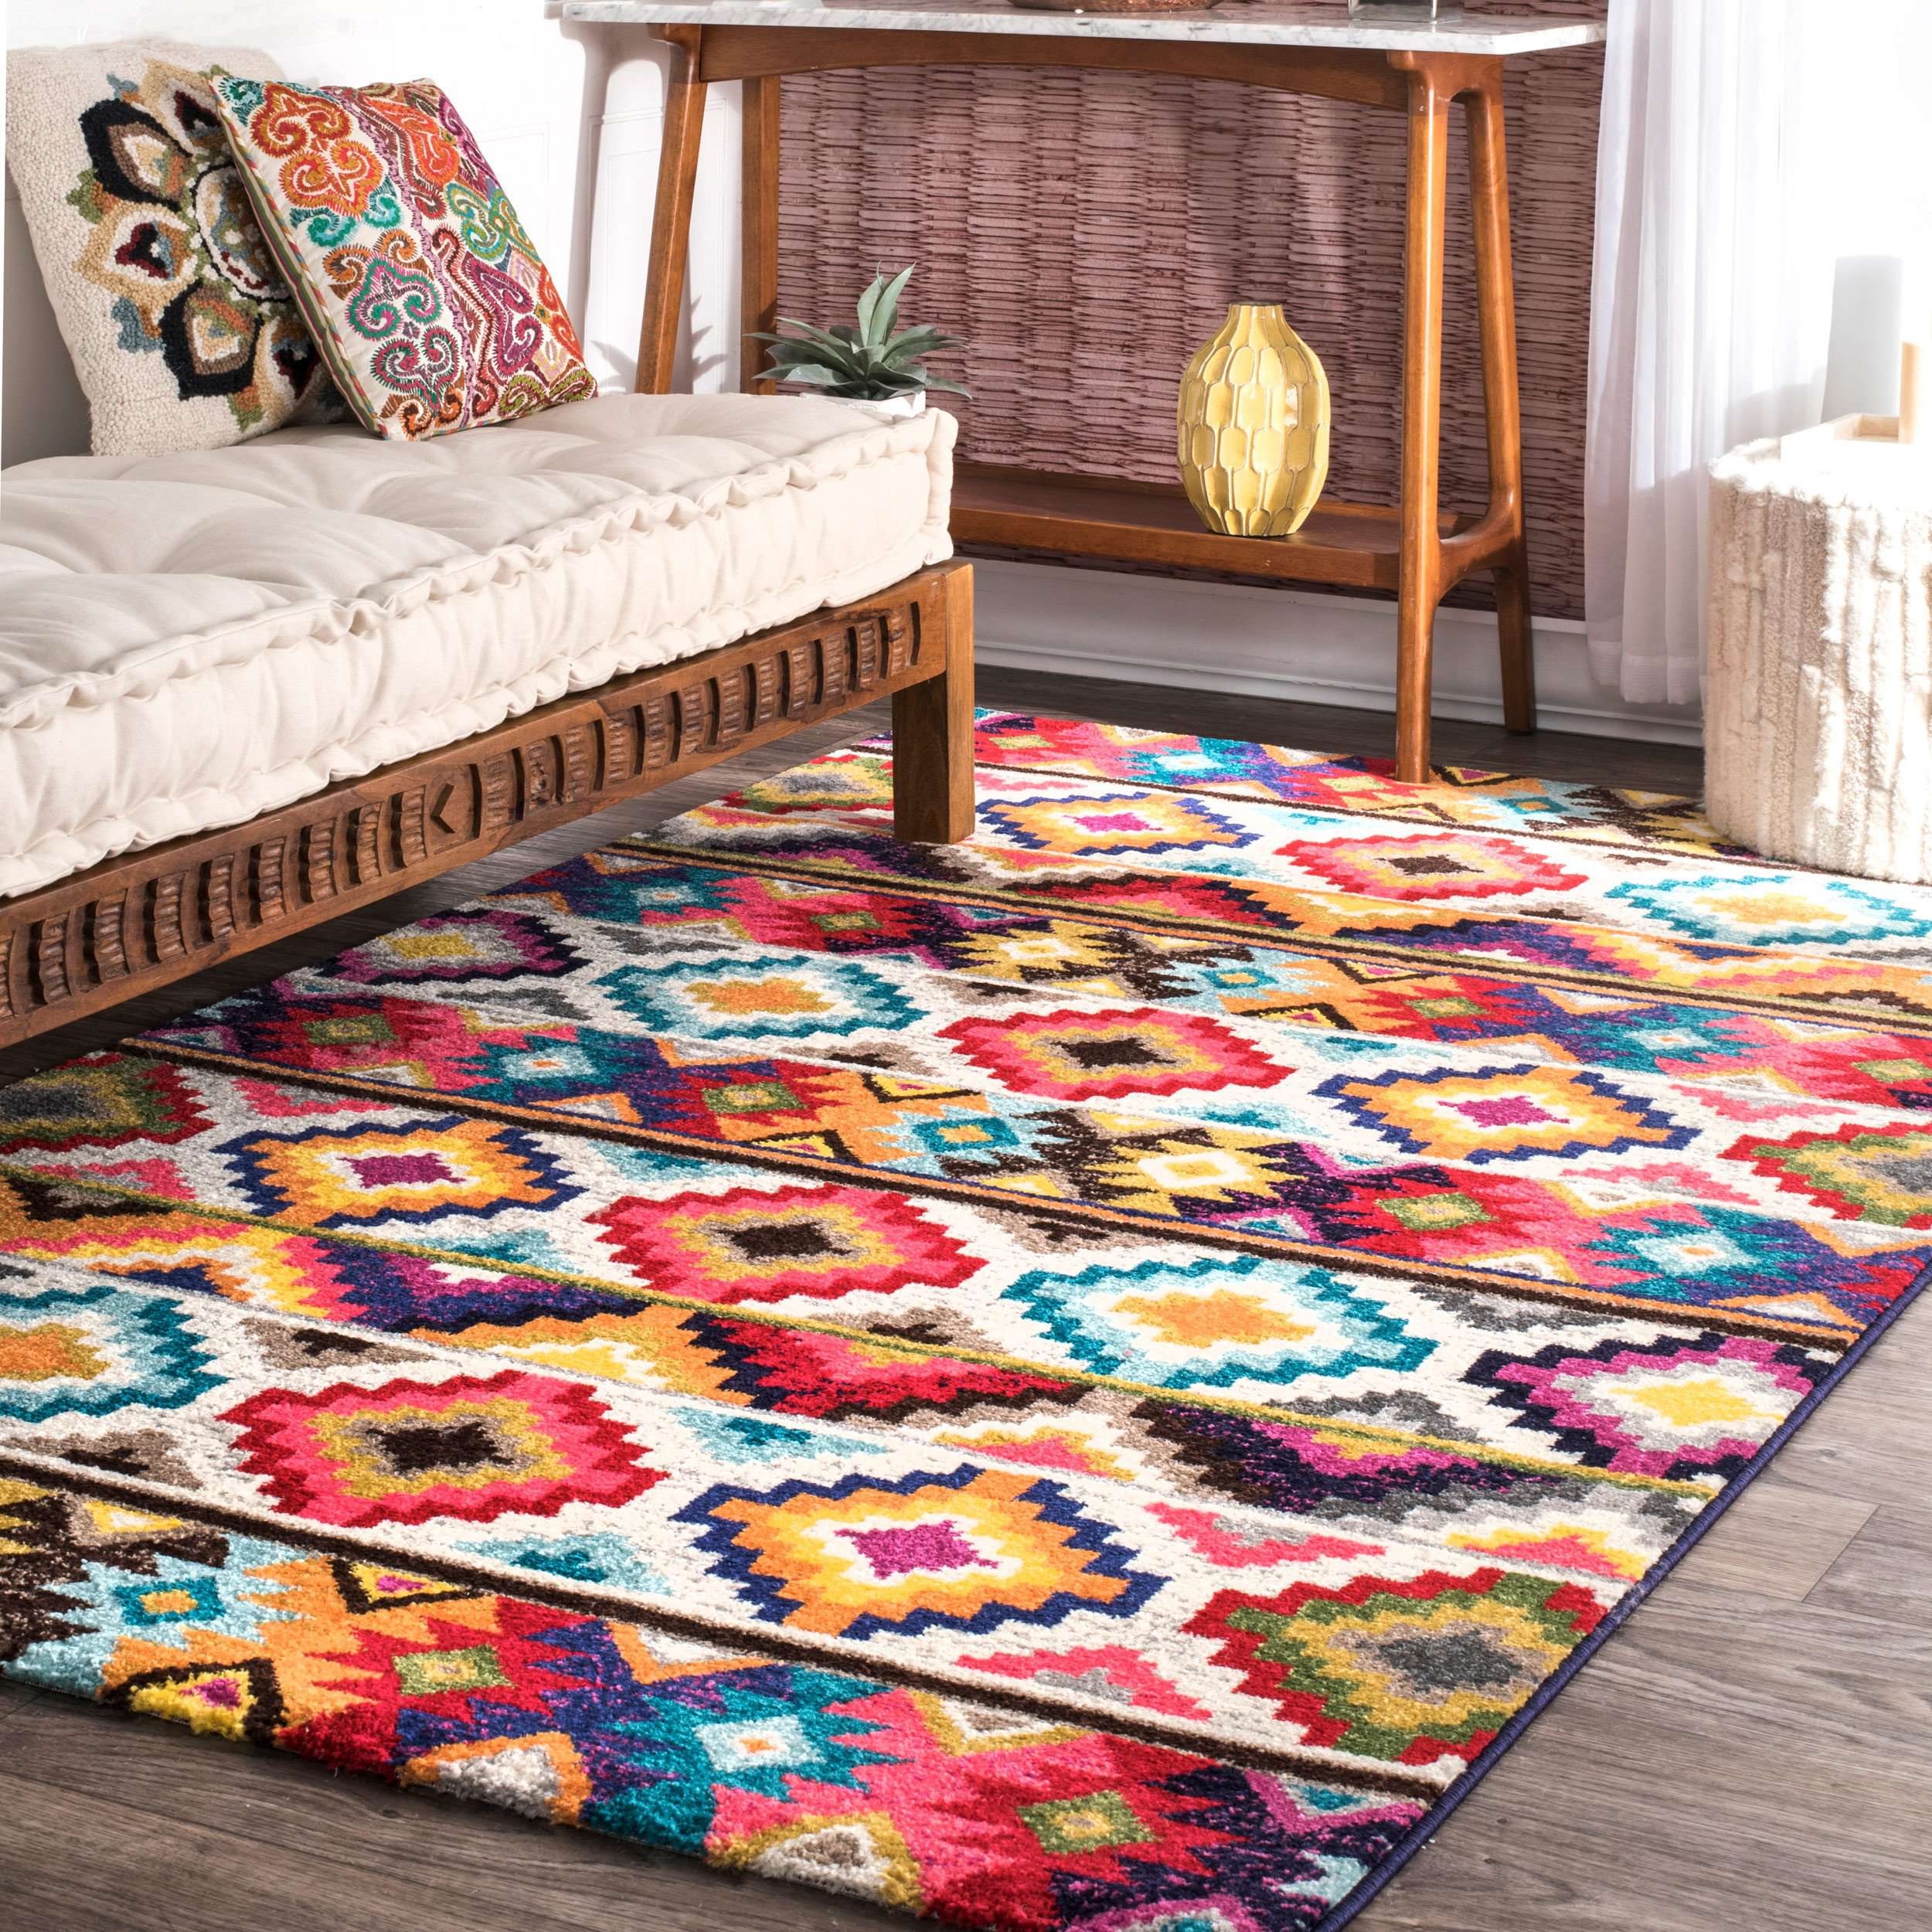 Colorful Rugs For Living Room You Ll, Colorful Rugs For Living Room